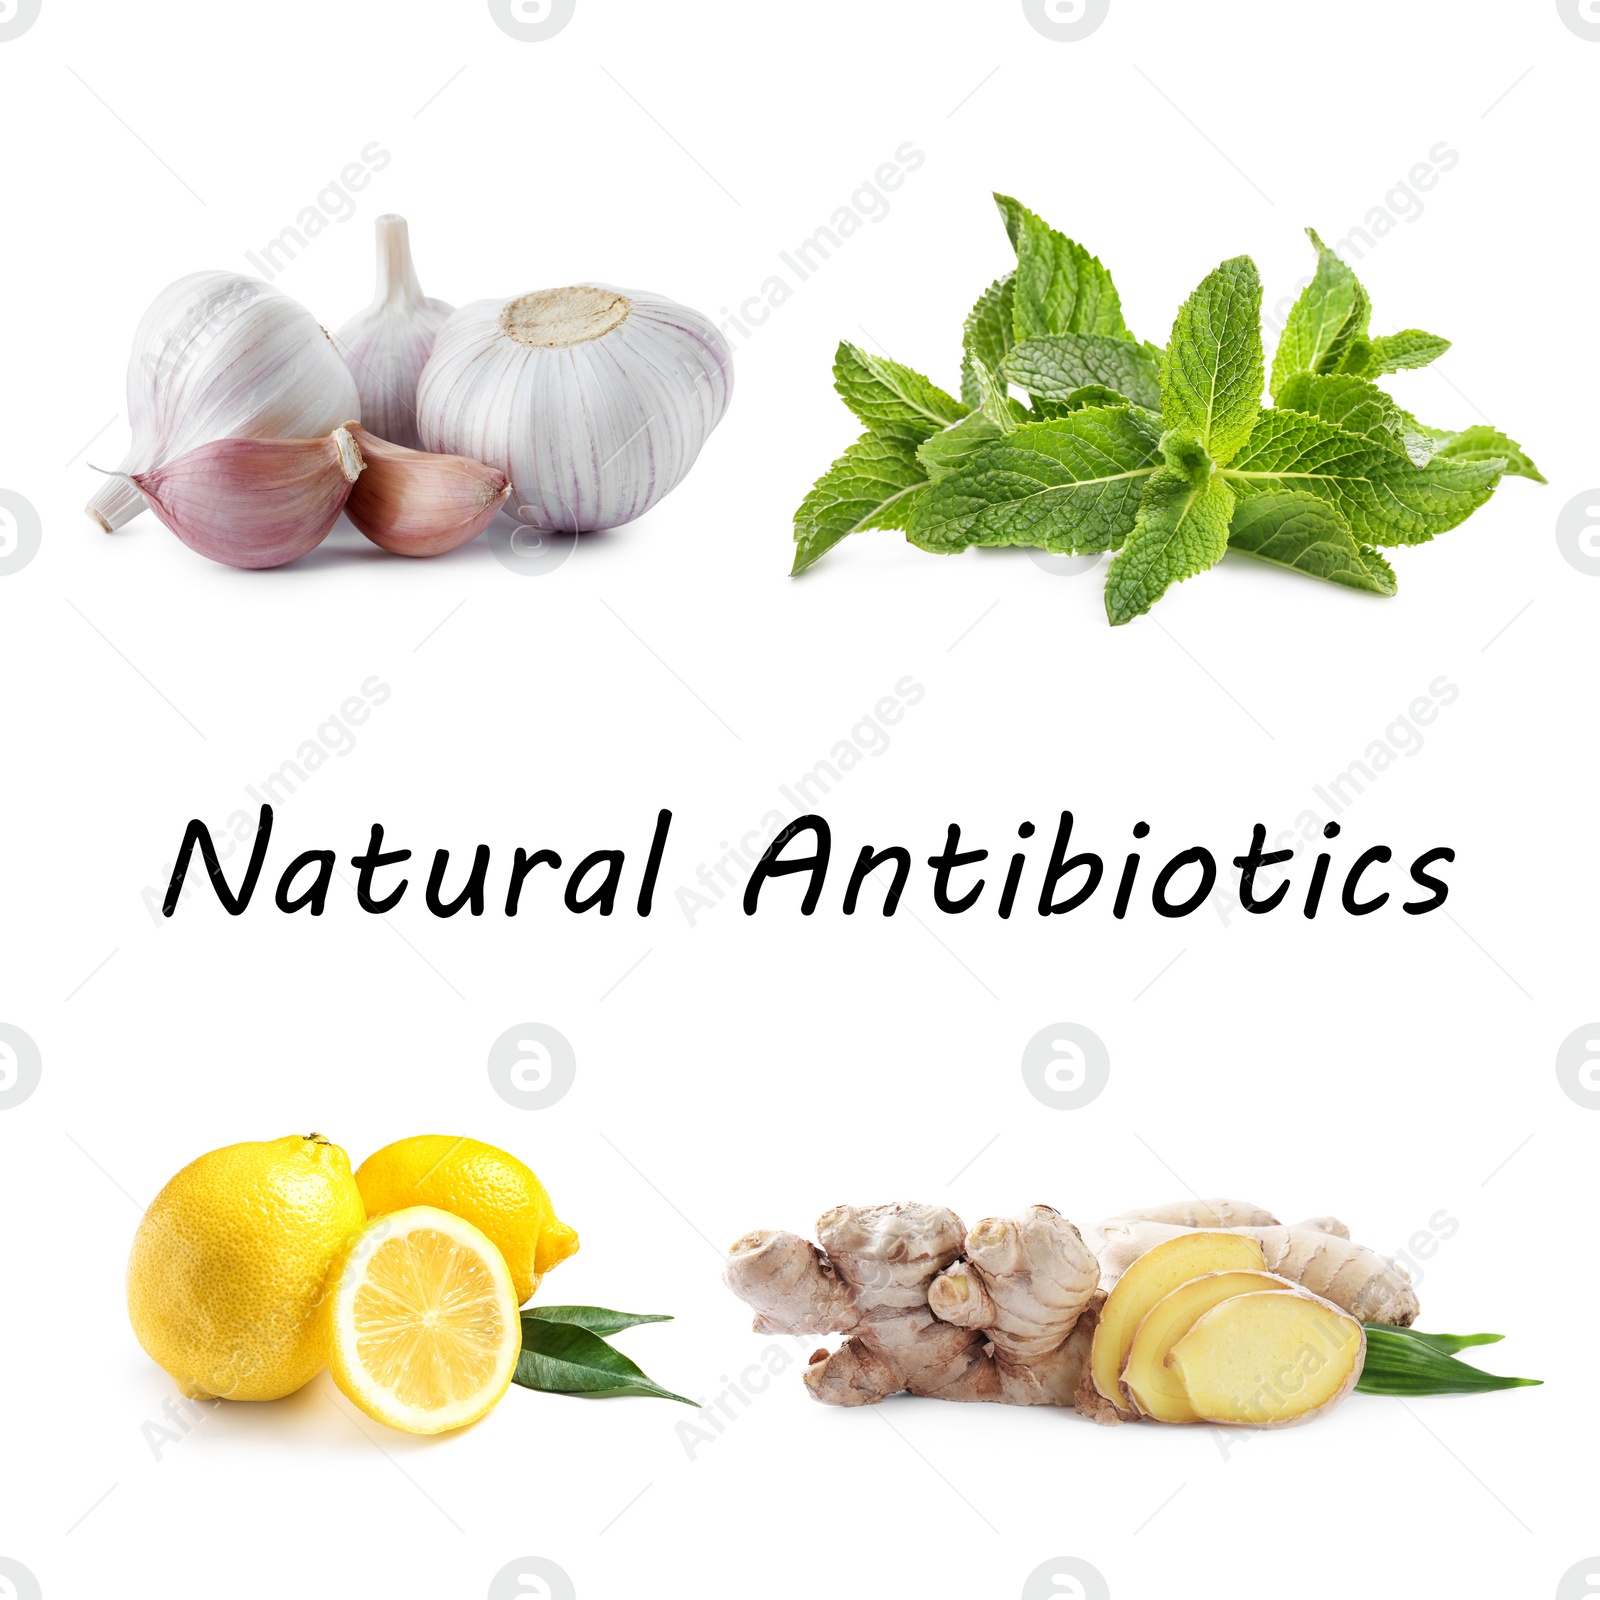 Image of Set of fresh products and text Natural Antibiotics isolated on white